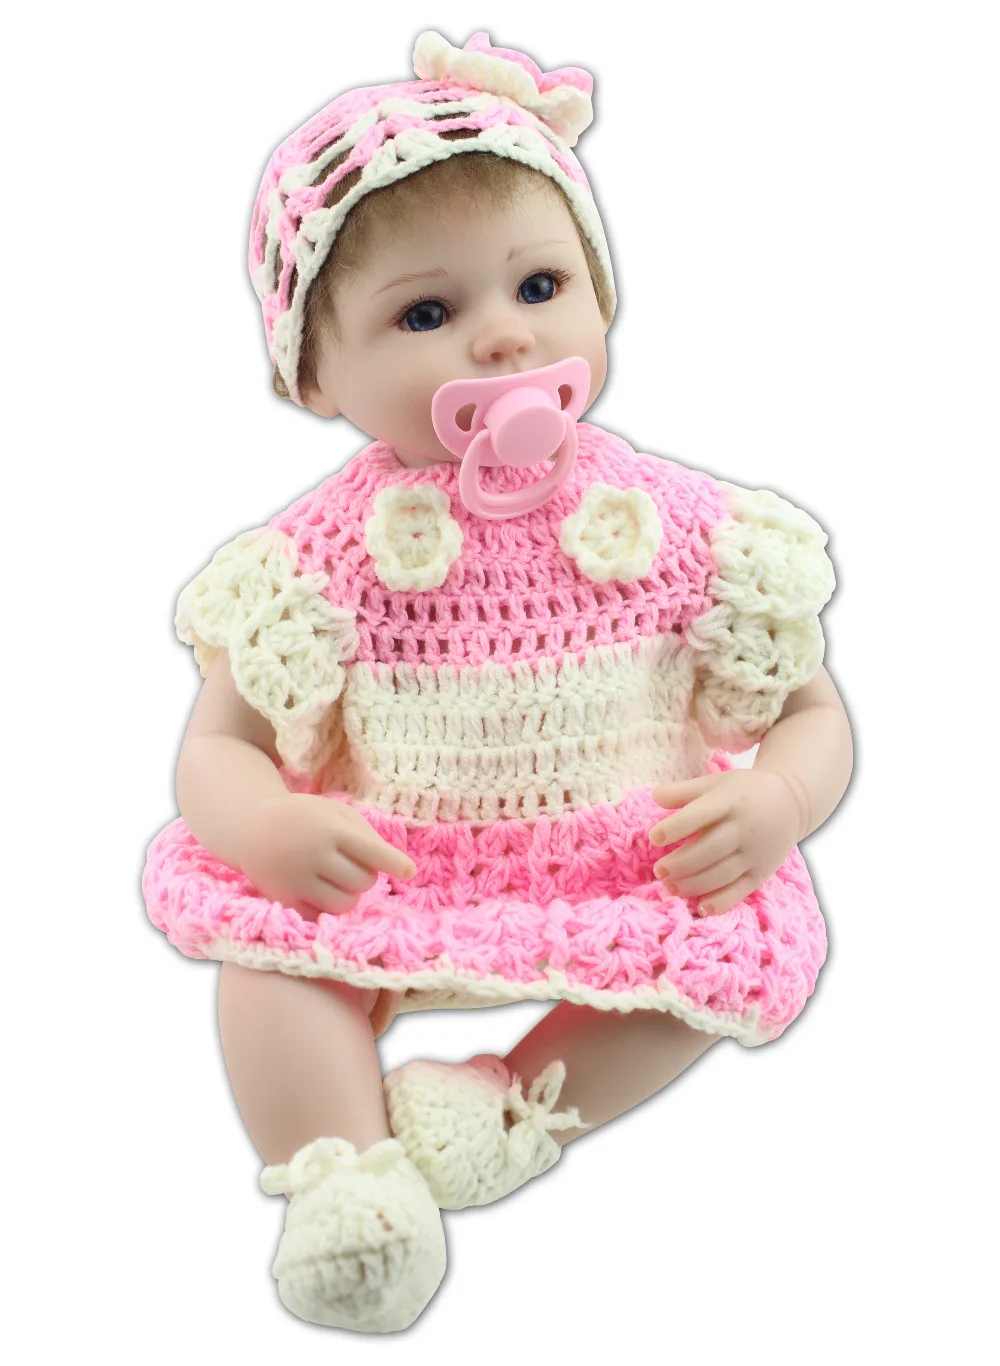 Silicone reborn baby doll toys lifelike 40cm reborn babies play house toy kids child Christmas birthday gift girl brinquedos